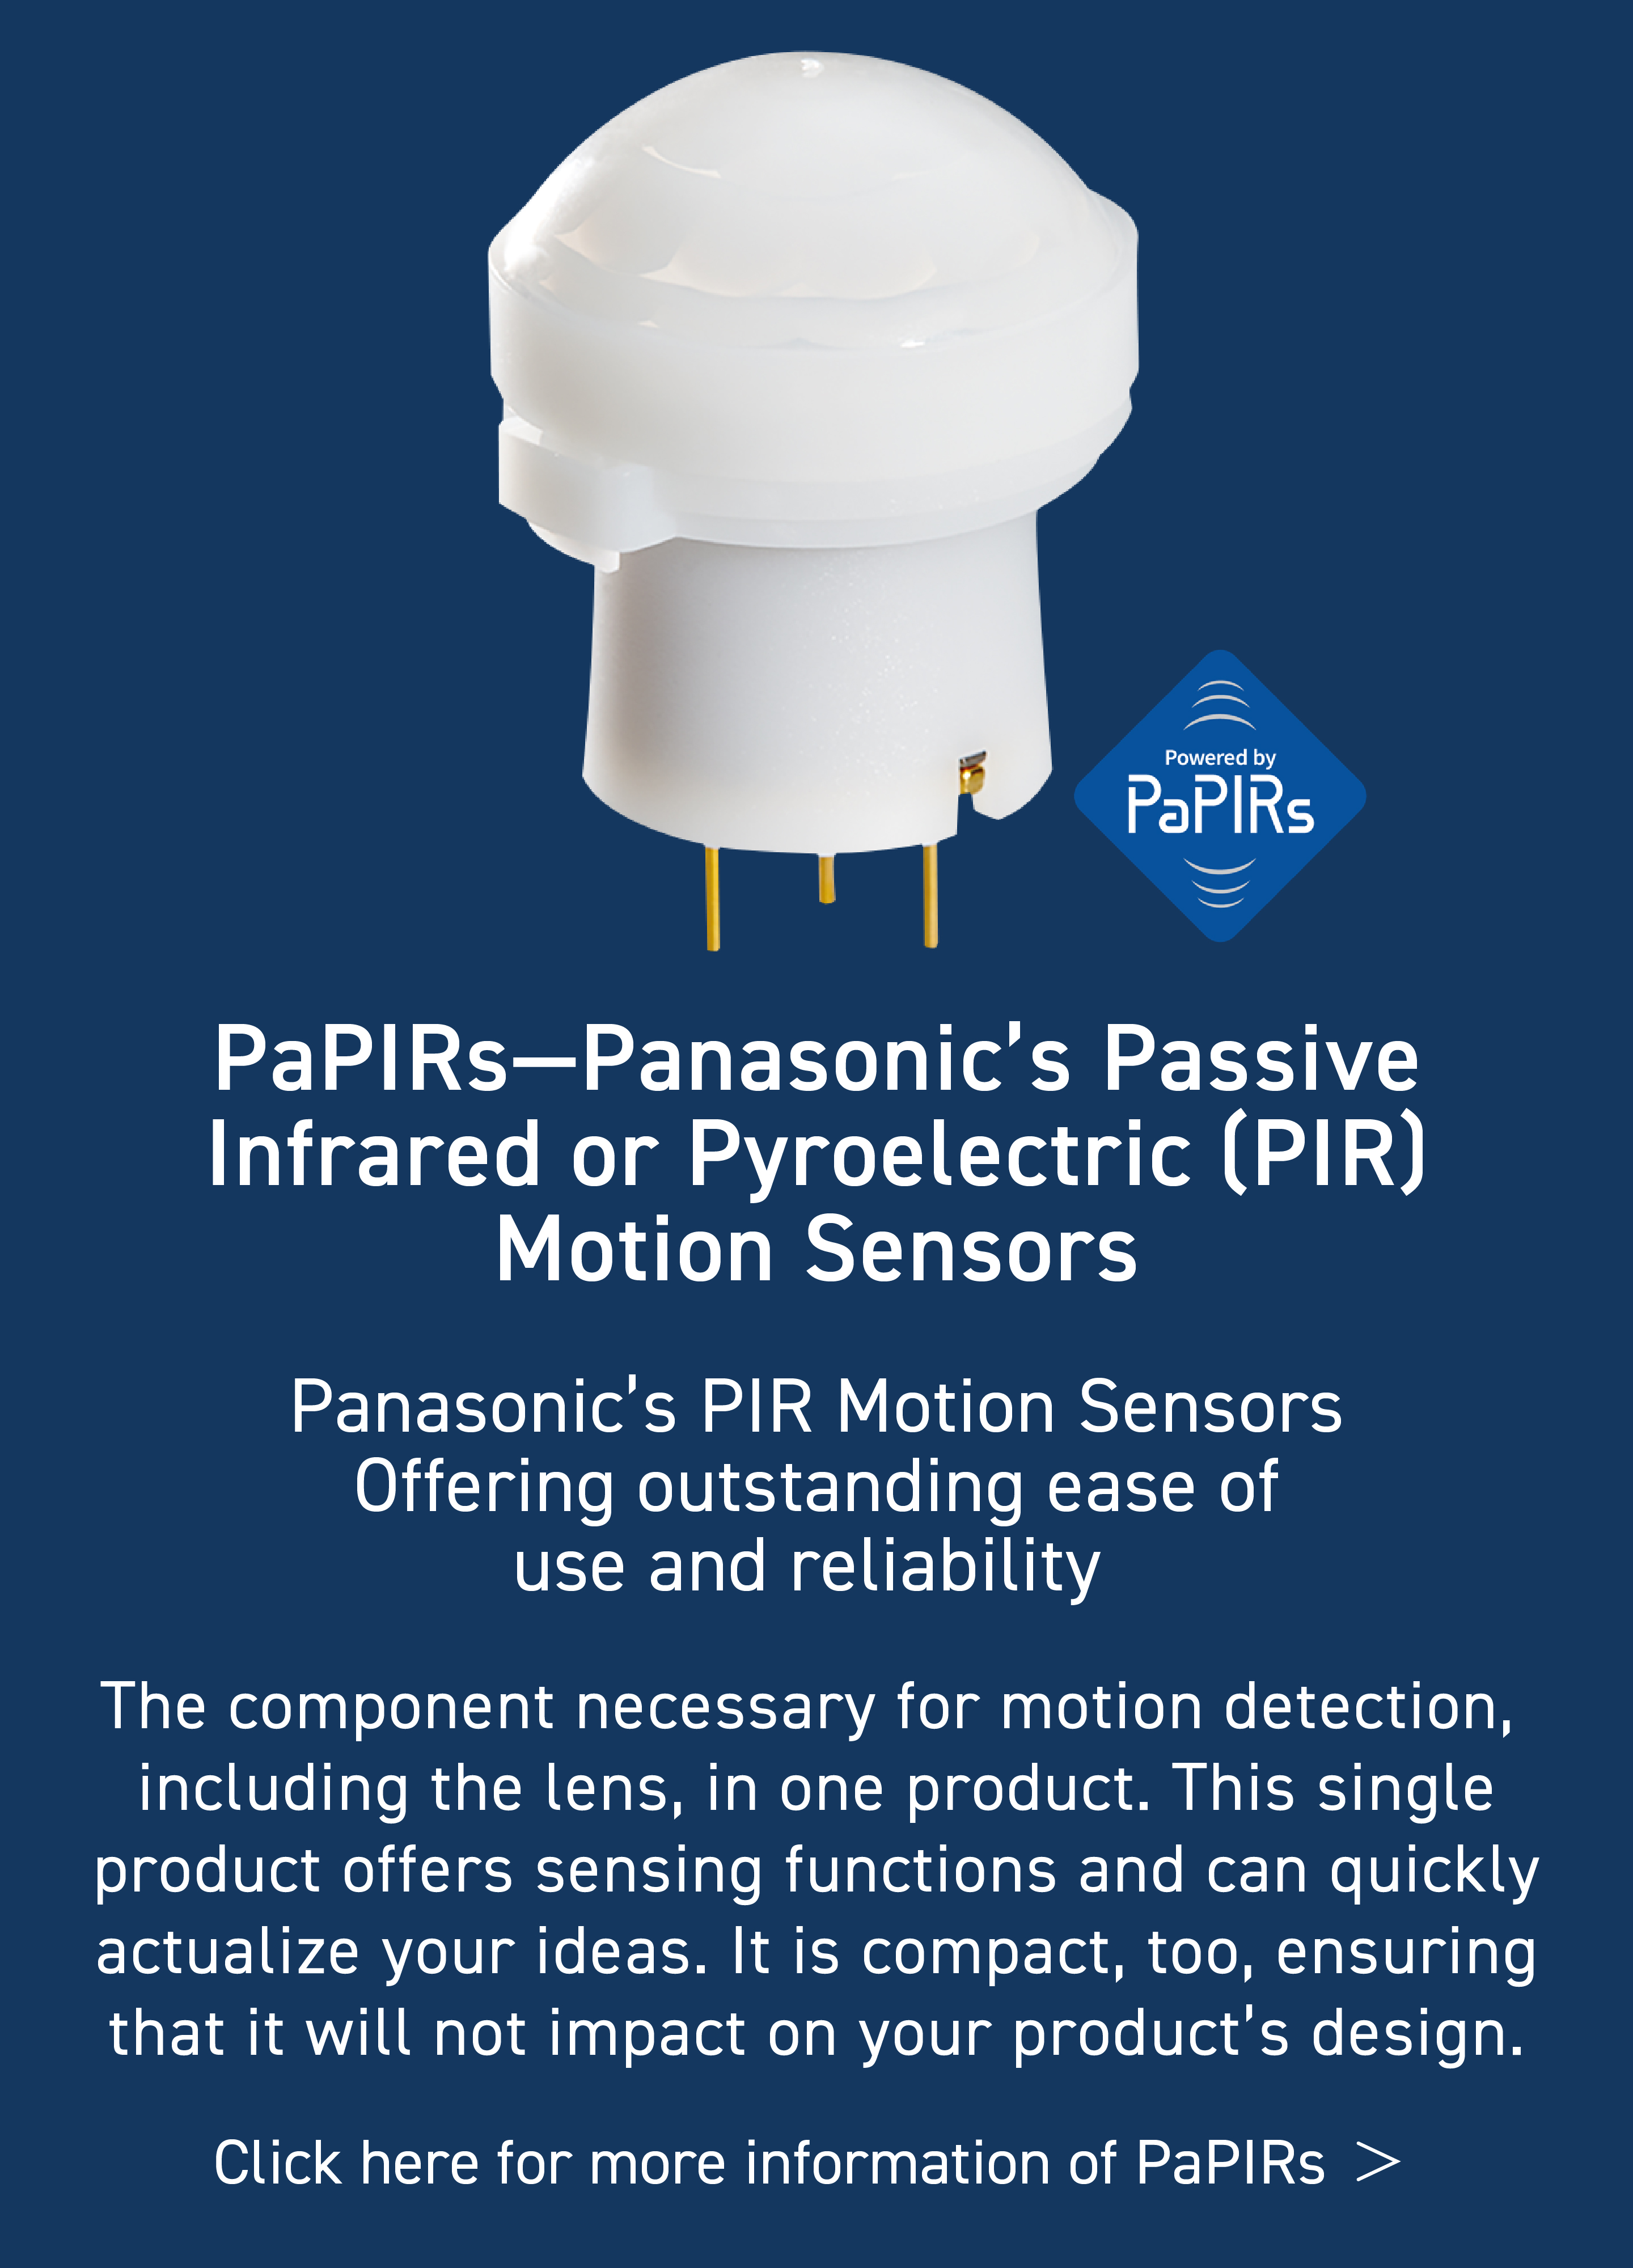 PaPIRs-Panasonic's Passive Infrared or Pyroelectric (PIR)  Motion Sensors, Panasonic's PIR  Motion Sensors Offering outstanding ease of use and reliability